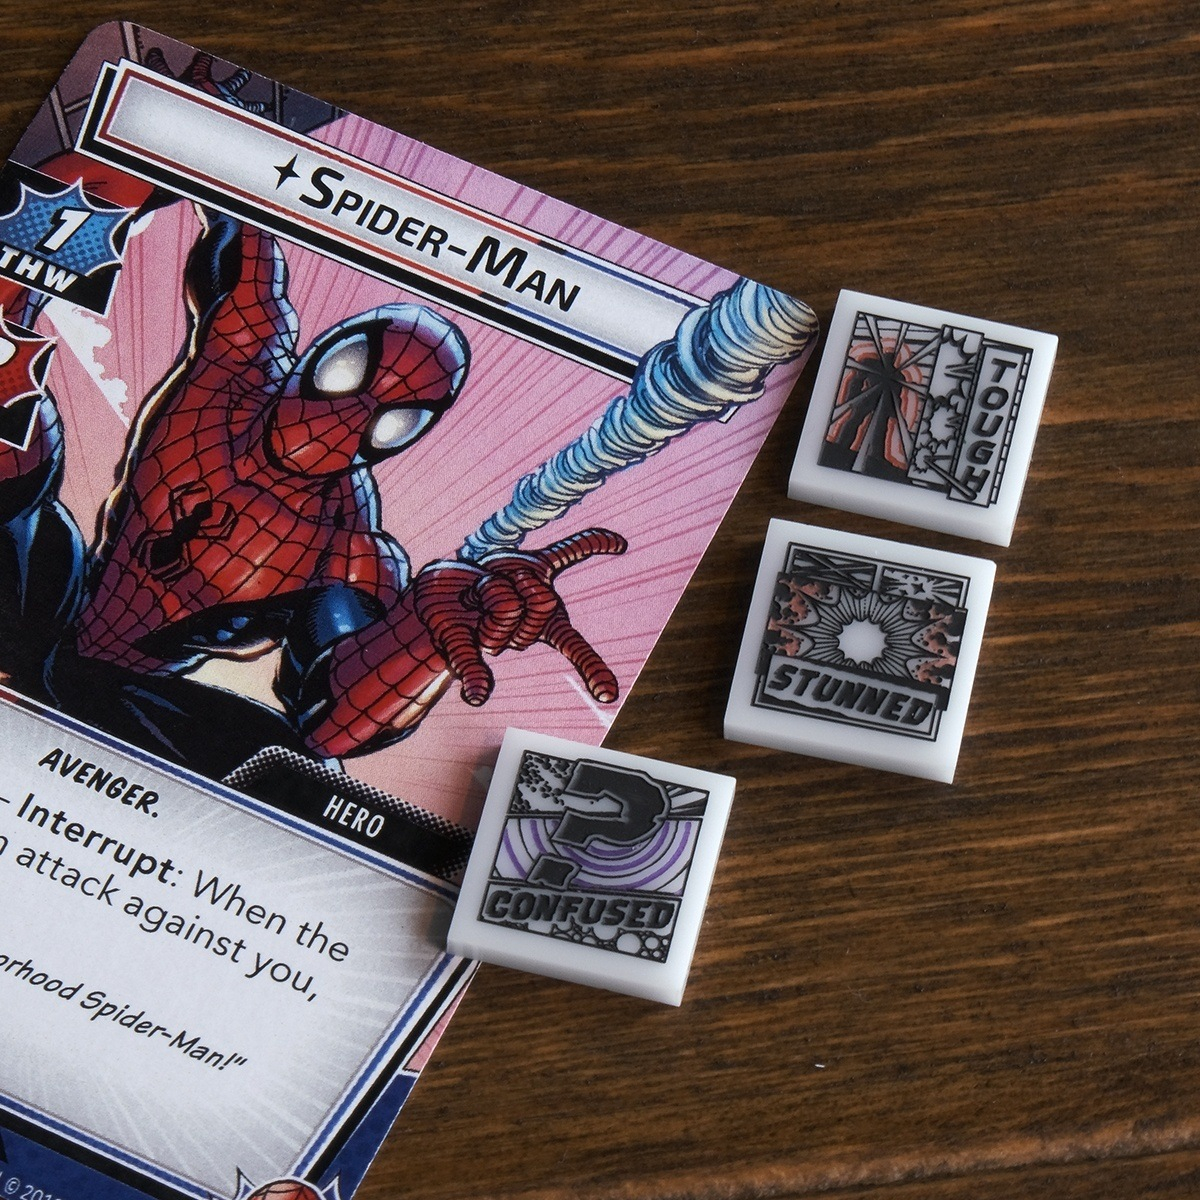 A Tough token, Stunned token, and Confused token are displayed on a wooden table just to the right of the Marvel Champions LCG card, Spider-Man